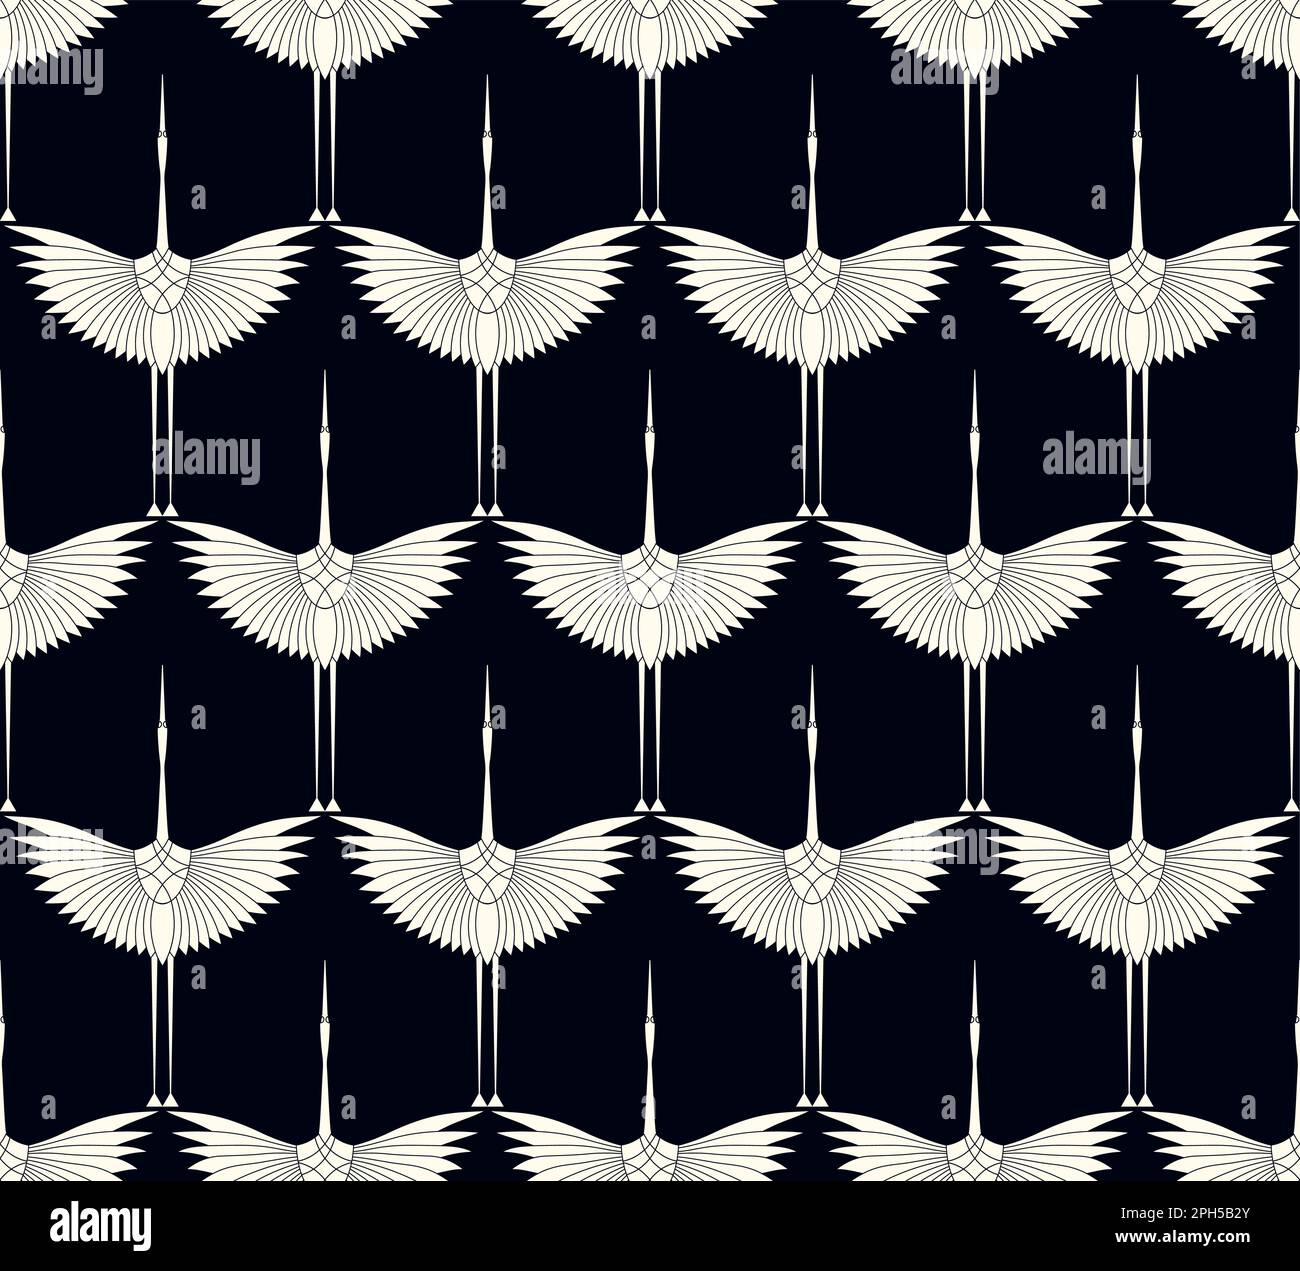 Herons in Art Deco style. Seamless Pattern for interior decoration, textiles. Fashionable home decor. Vector illustration texture isolated on black Stock Vector